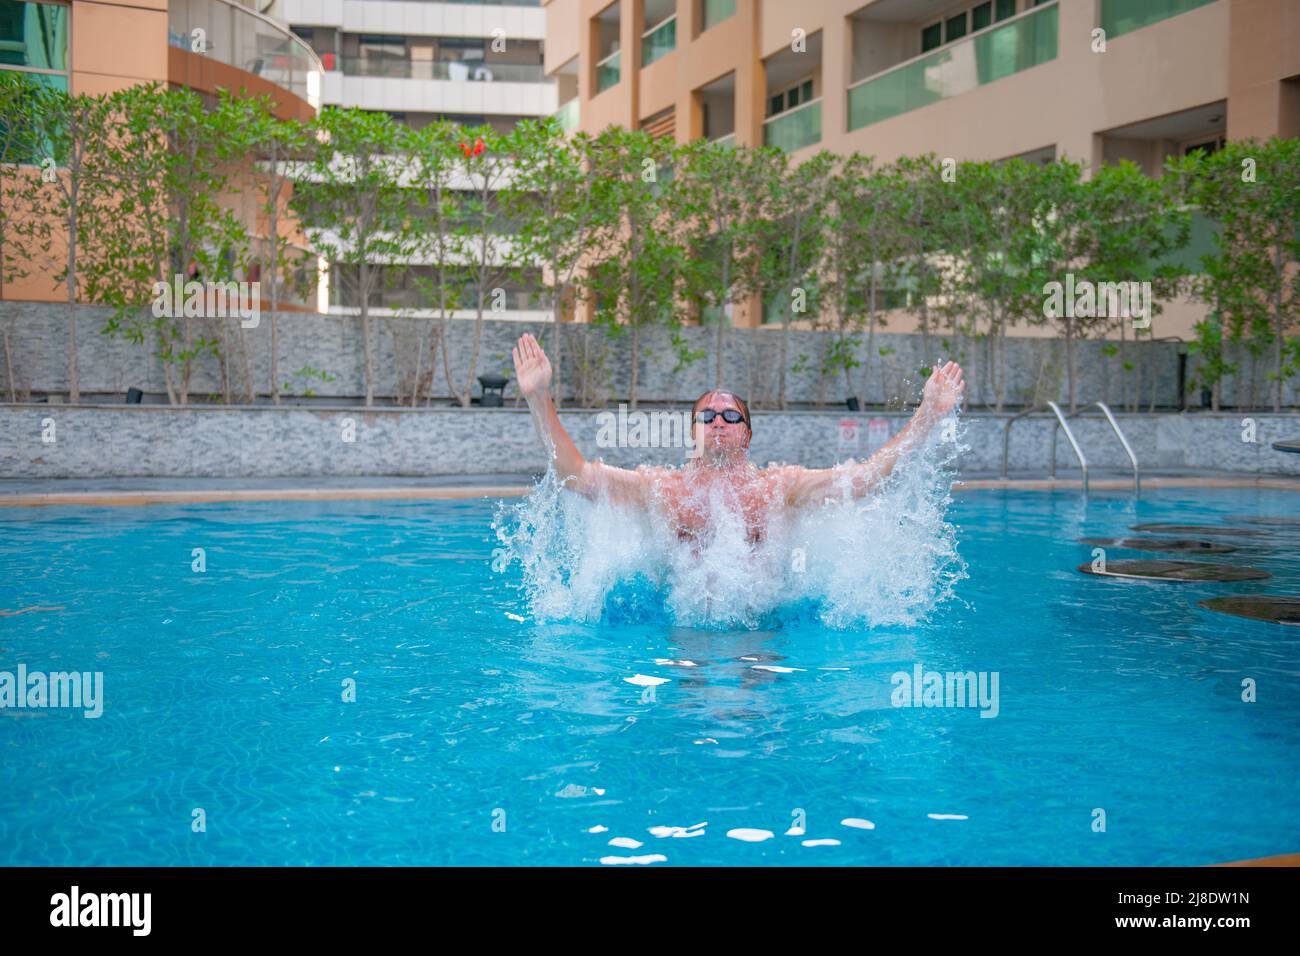 one boy is jumping up in the big pool Stock Photo